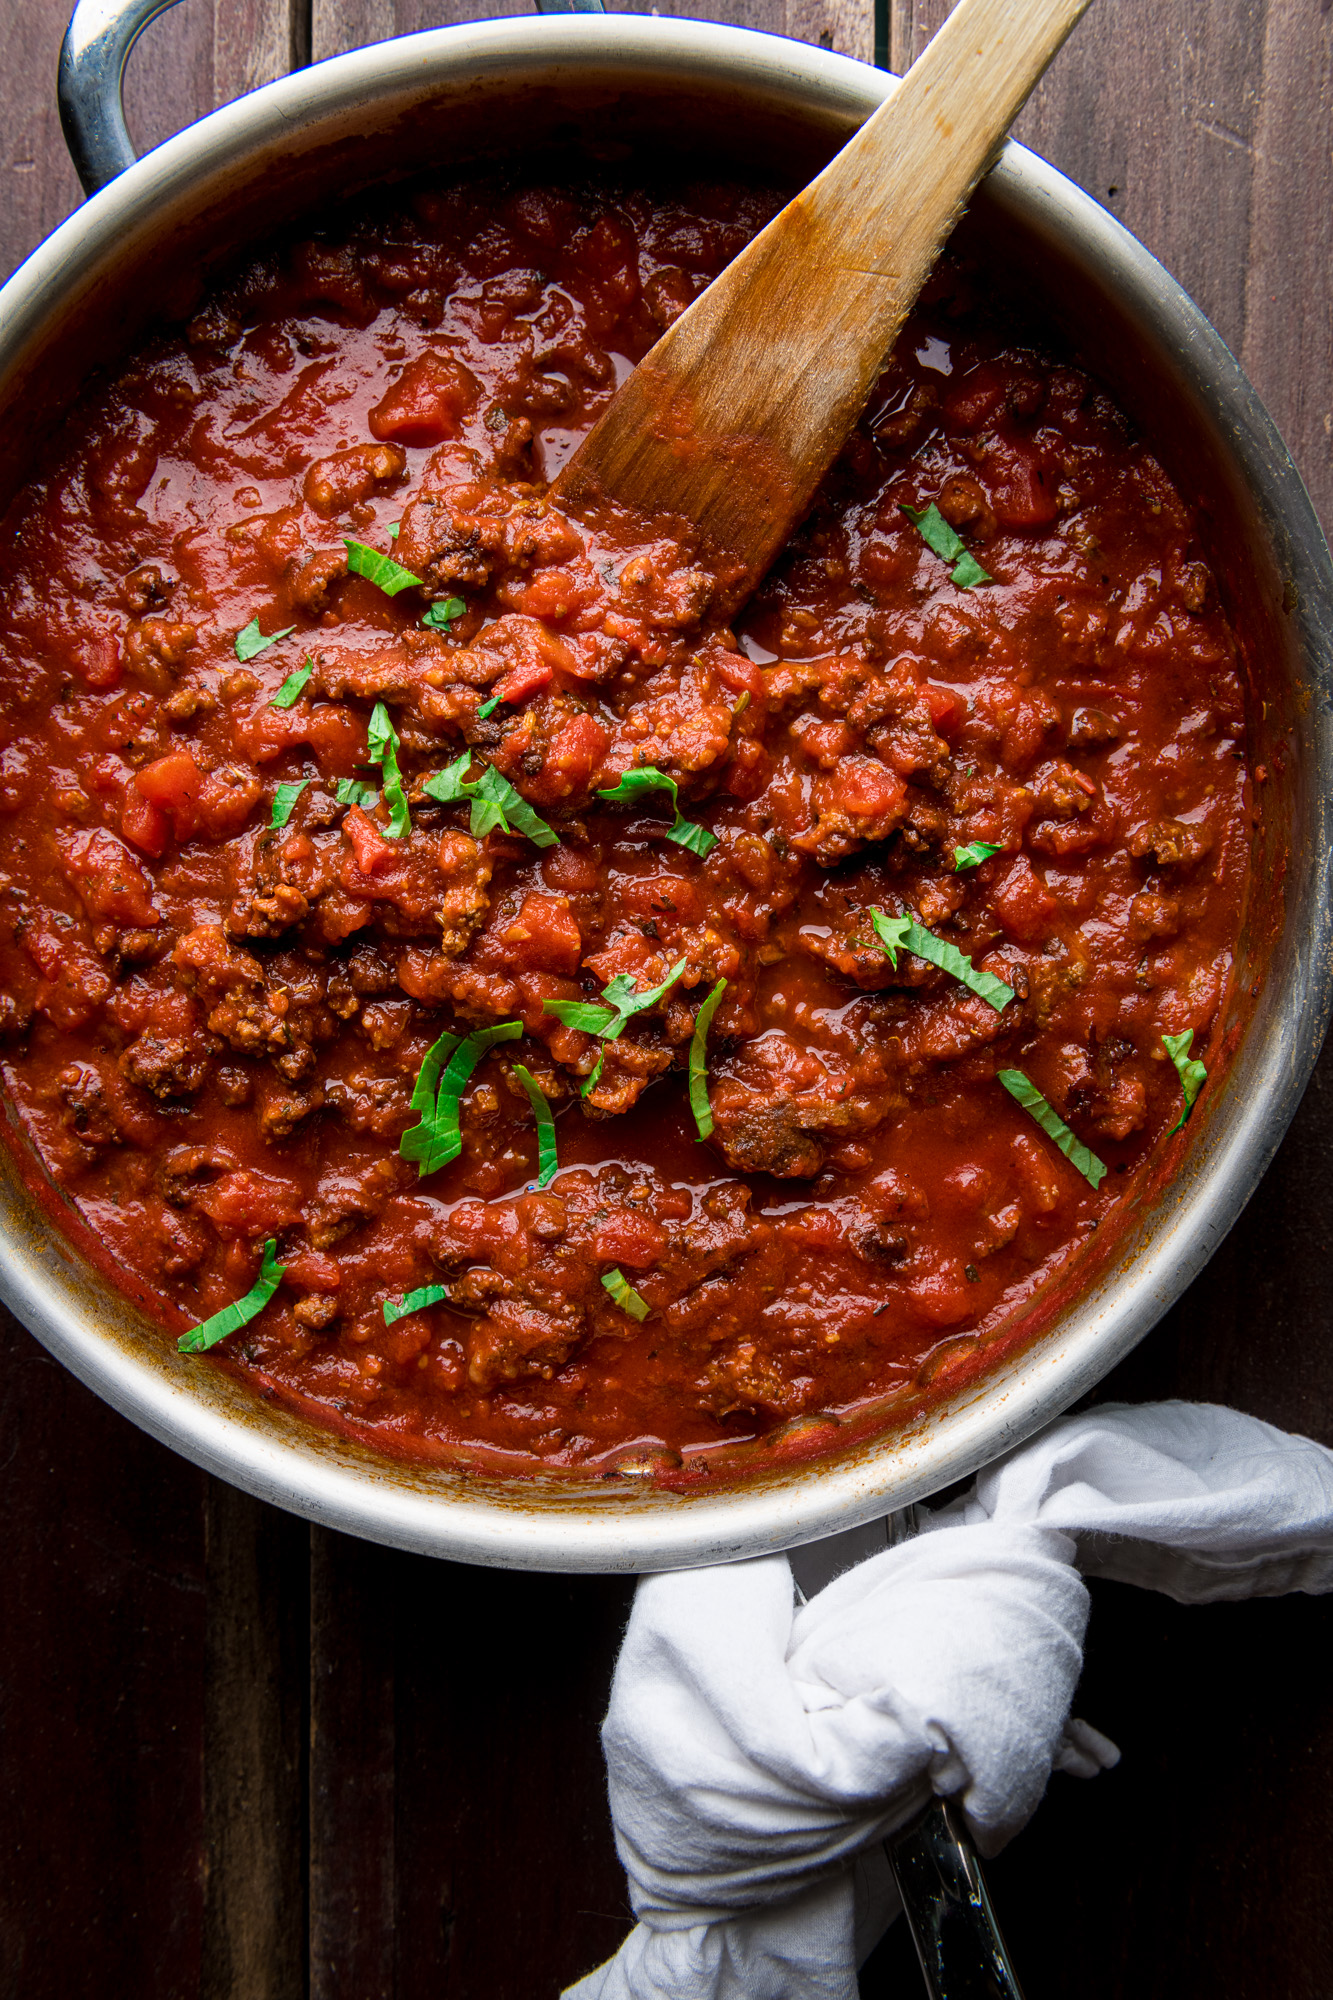 Skillet of garlic free quick and easy spaghetti sauce